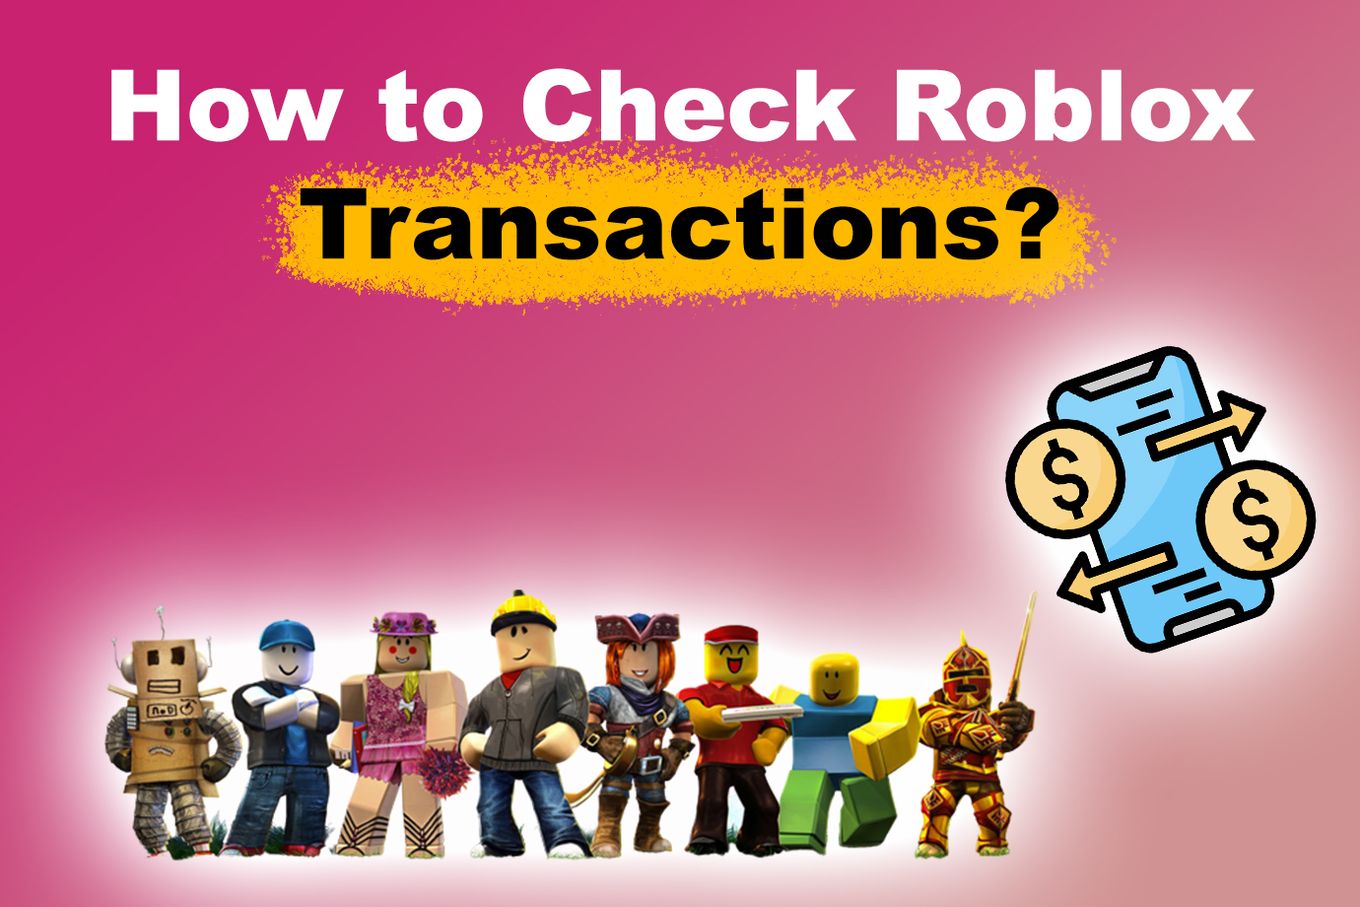 How to Check Roblox Transactions